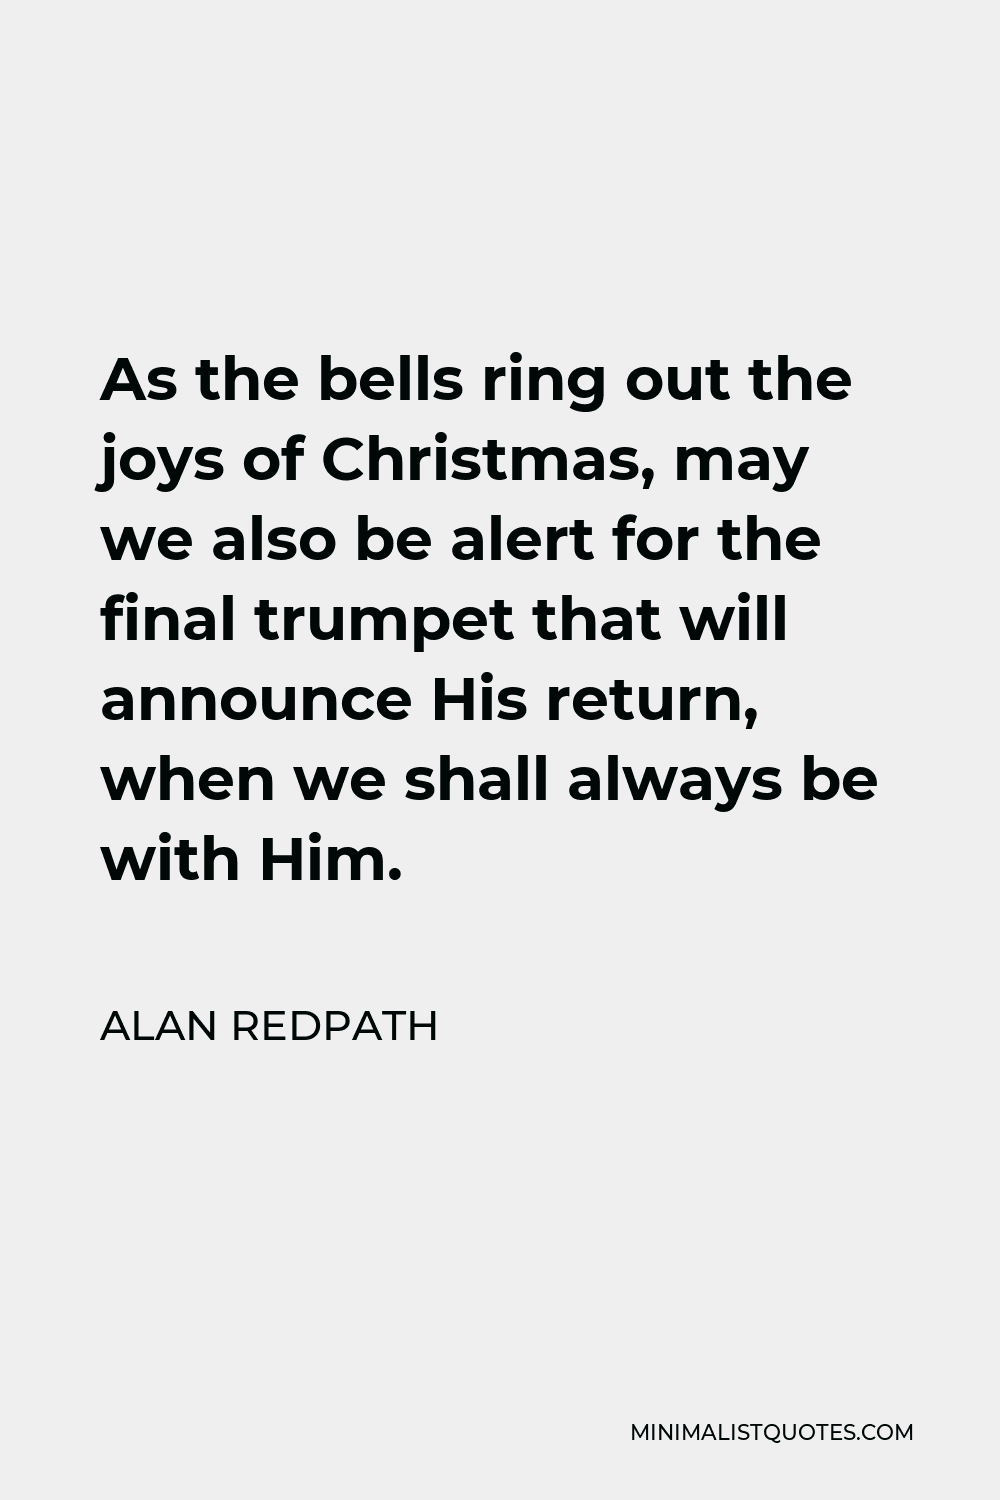 Alan Redpath Quote - As the bells ring out the joys of Christmas, may we also be alert for the final trumpet that will announce His return, when we shall always be with Him.